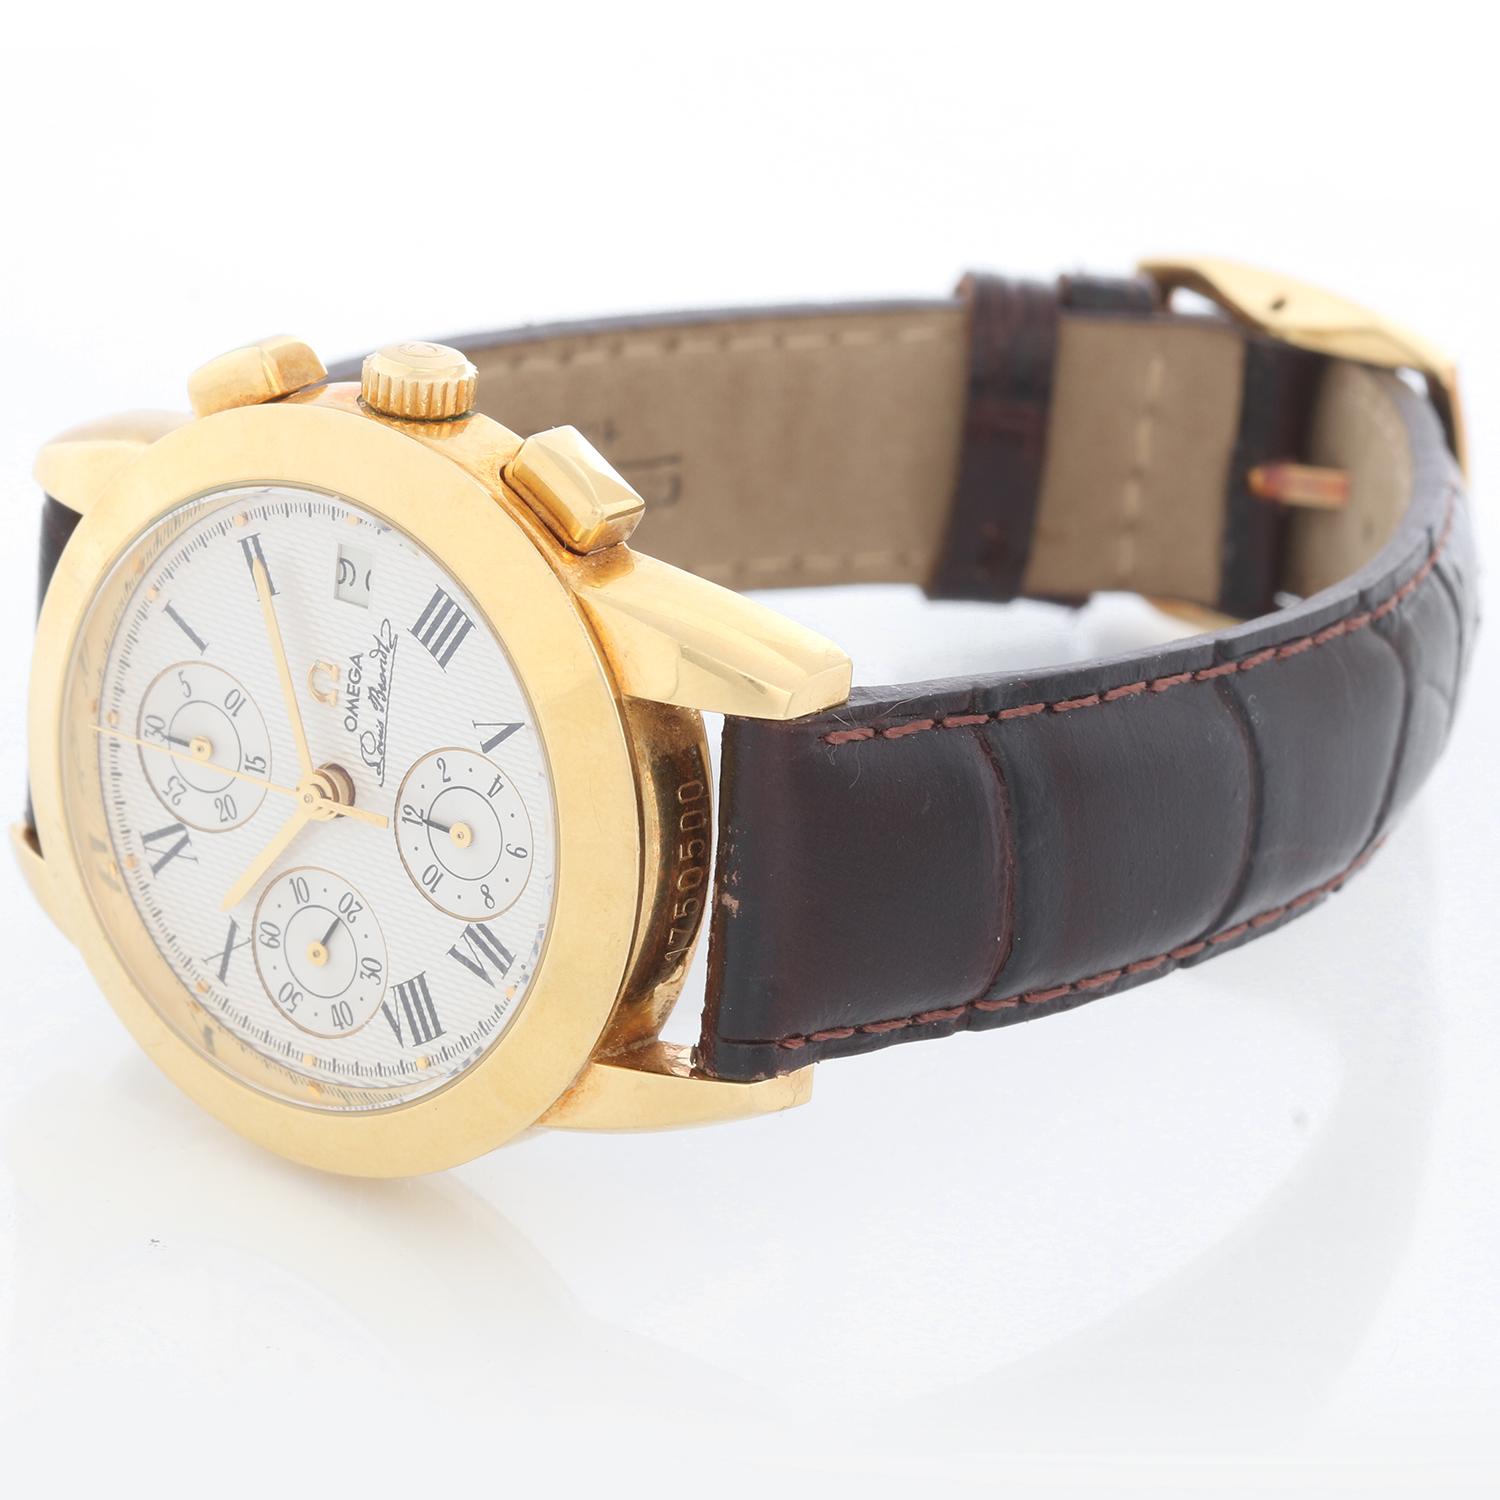 Omega Louis Brandt II Chronograph 18K Yellow Gold Watch - Automatic chronometer. 18K solid yellow gold. Silvered 38mm with 